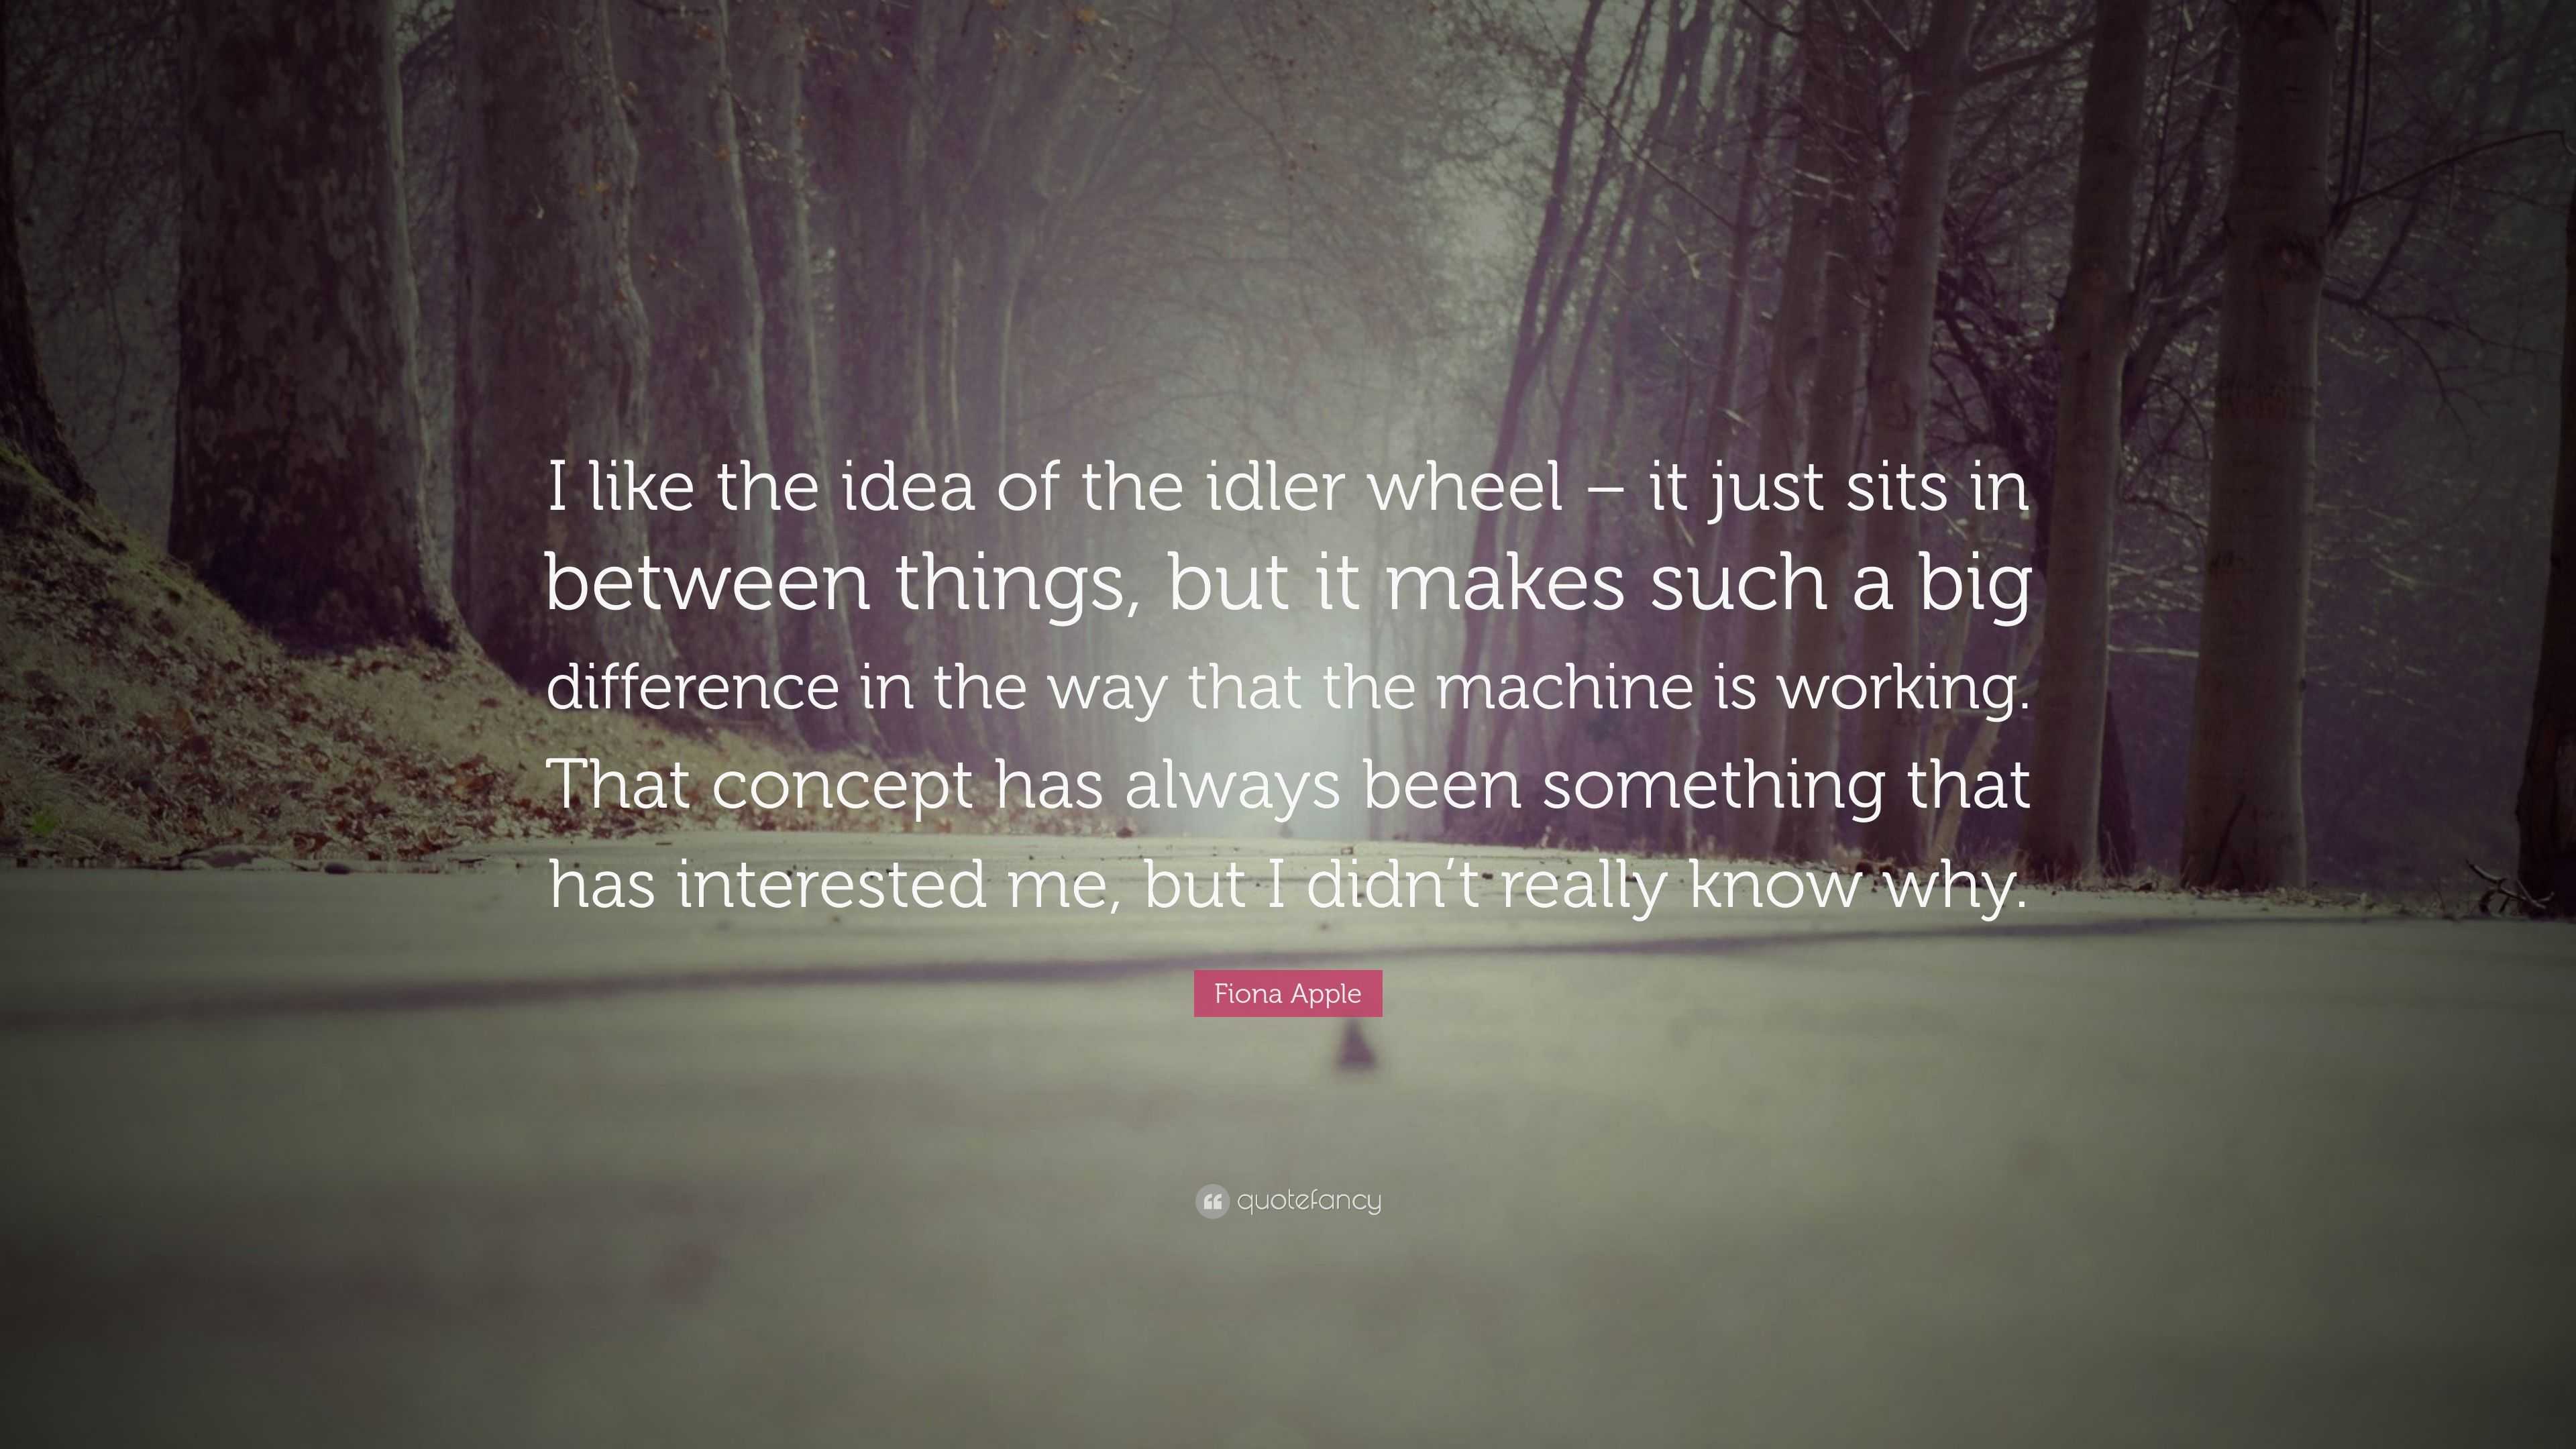 Fiona Apple Quote: “I like the idea of the idler wheel – it just sits ...